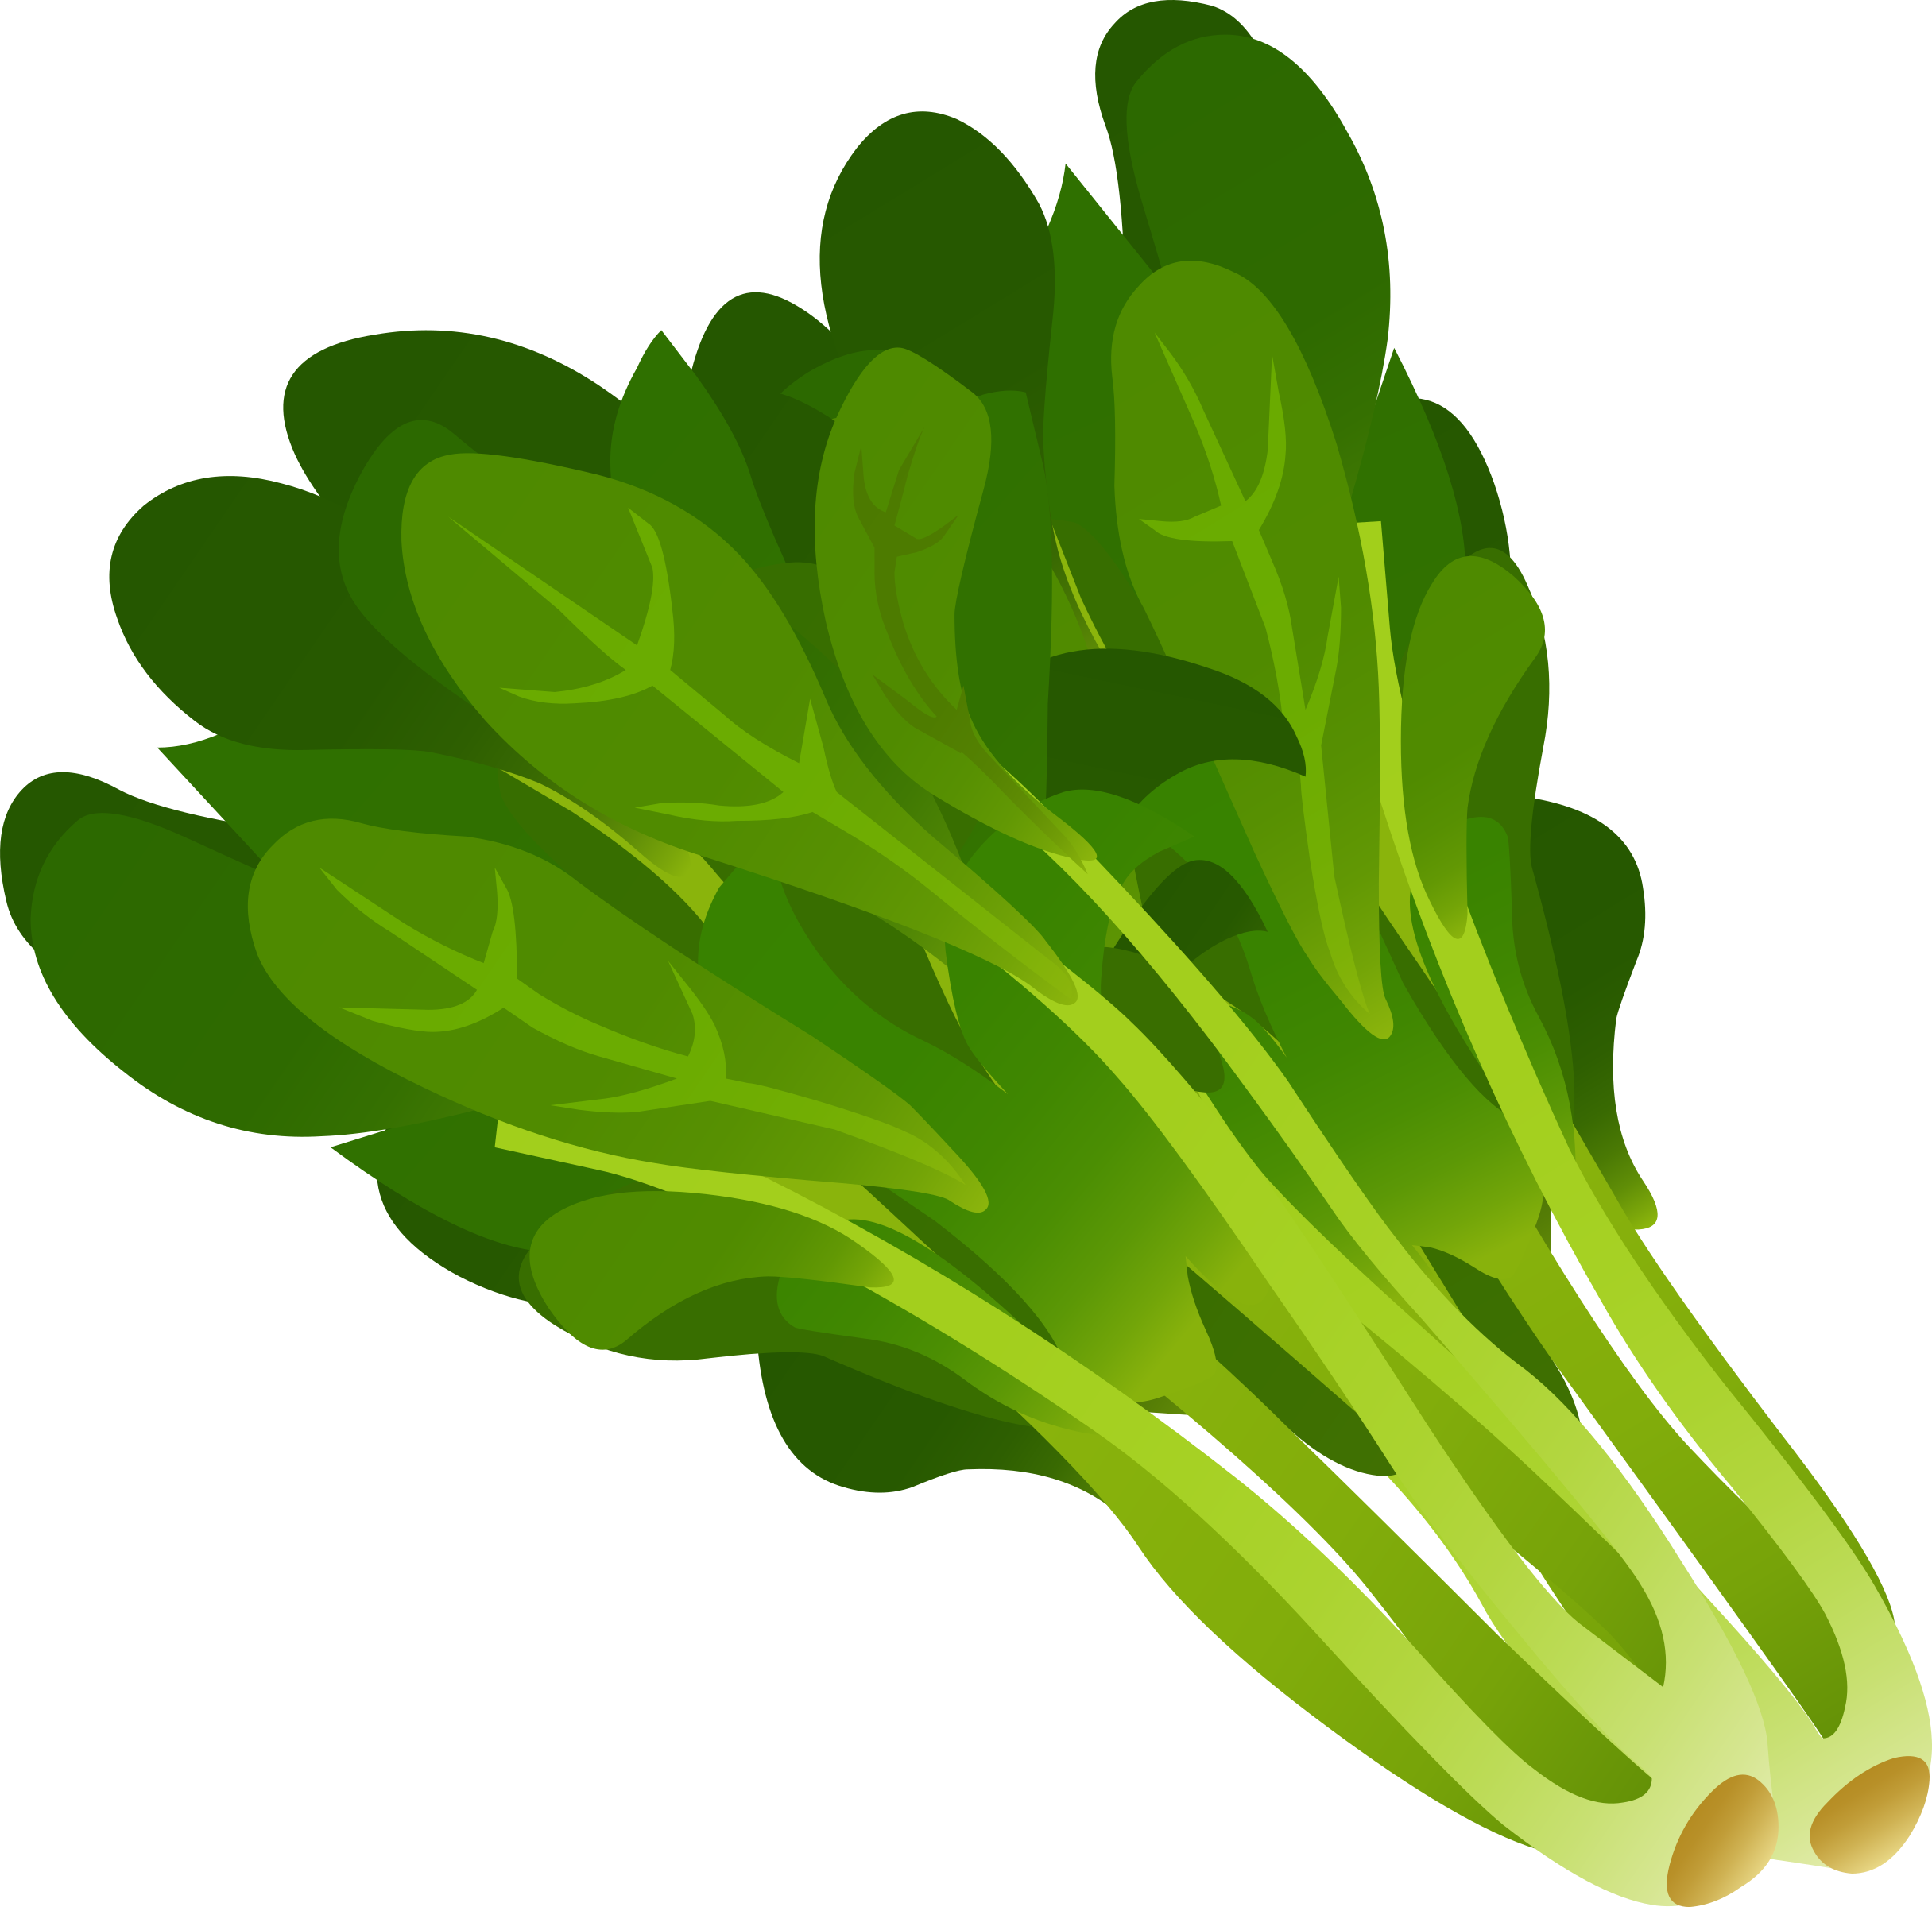 Spinach svg #13, Download drawings